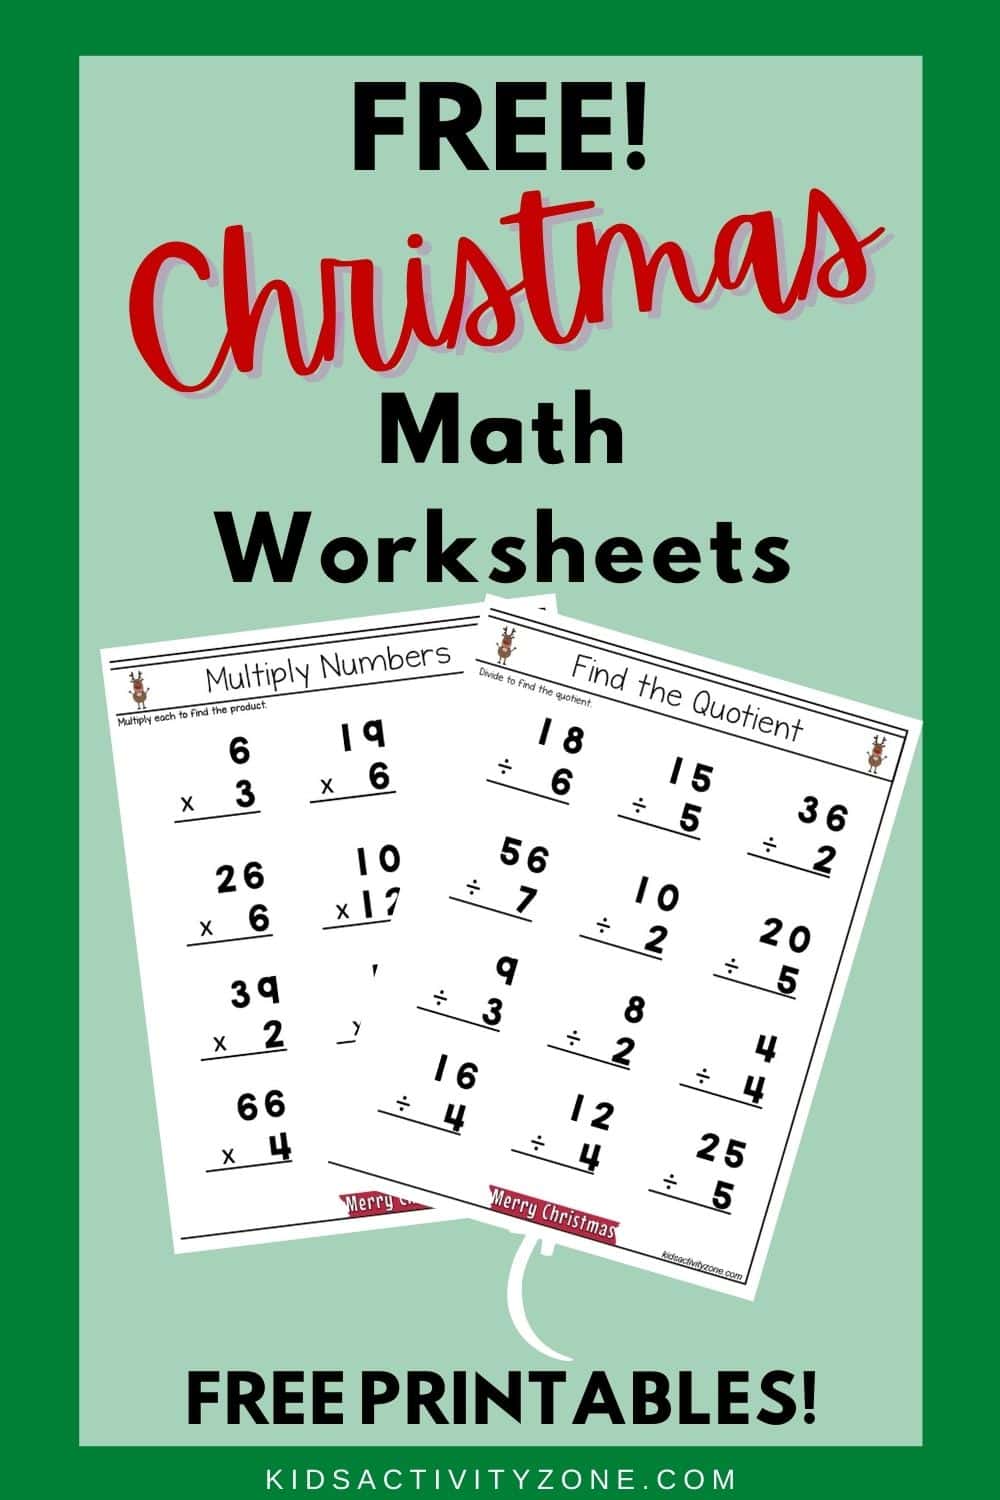 Christmas Math Worksheets including pages of subtraction, addition, division and multiplication. This math packet is geared towards third graders, but is great for excelled second graders or a great review for fourth grade of if kids need a little extra practice! 